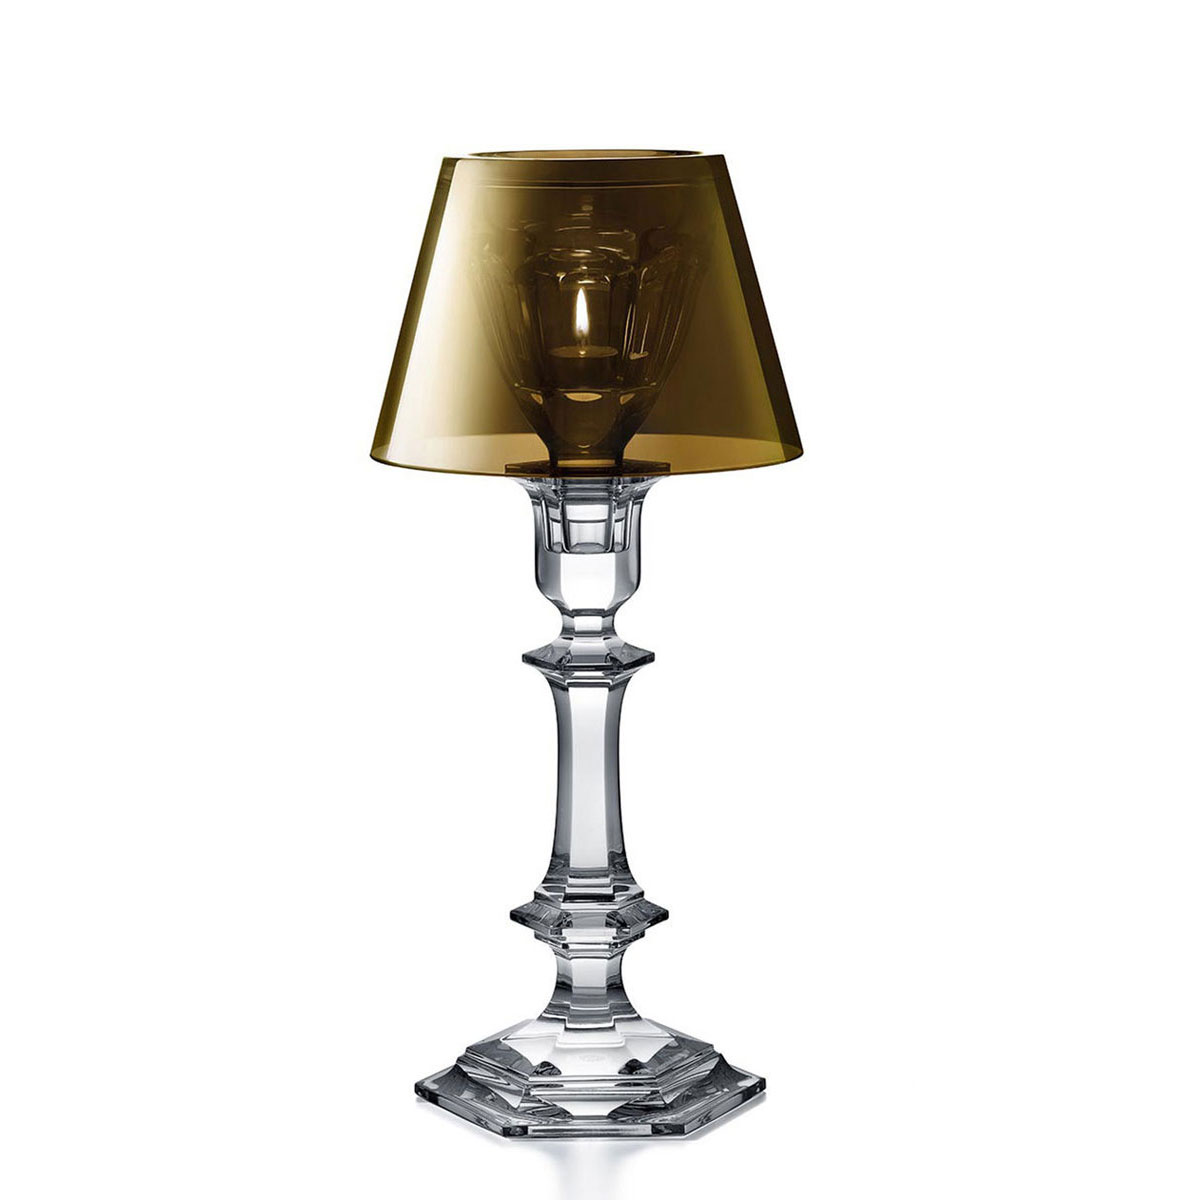 Baccarat Crystal, Harcourt Our Fire Crystal Candleholder with Gold Shade